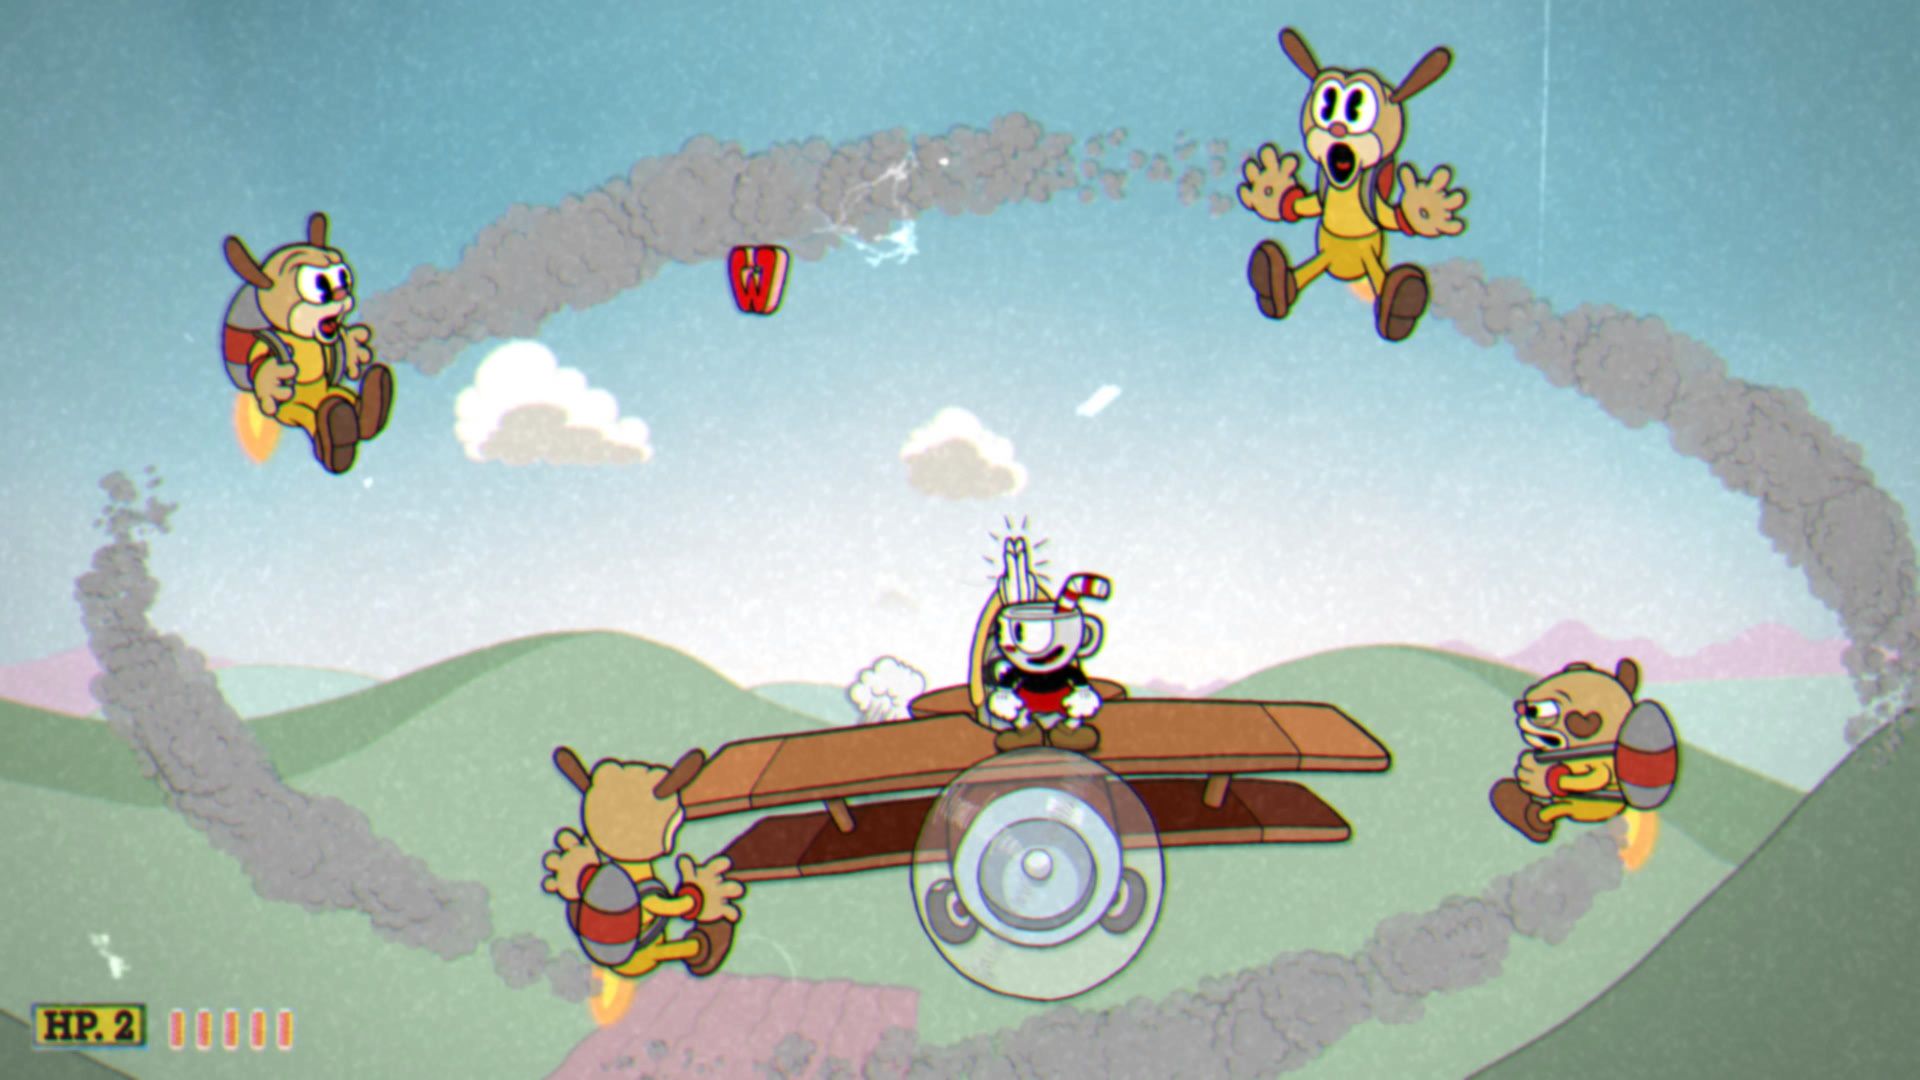 Cuphead The Delicious Course, The Howling Aces, Unlocking the secret phase